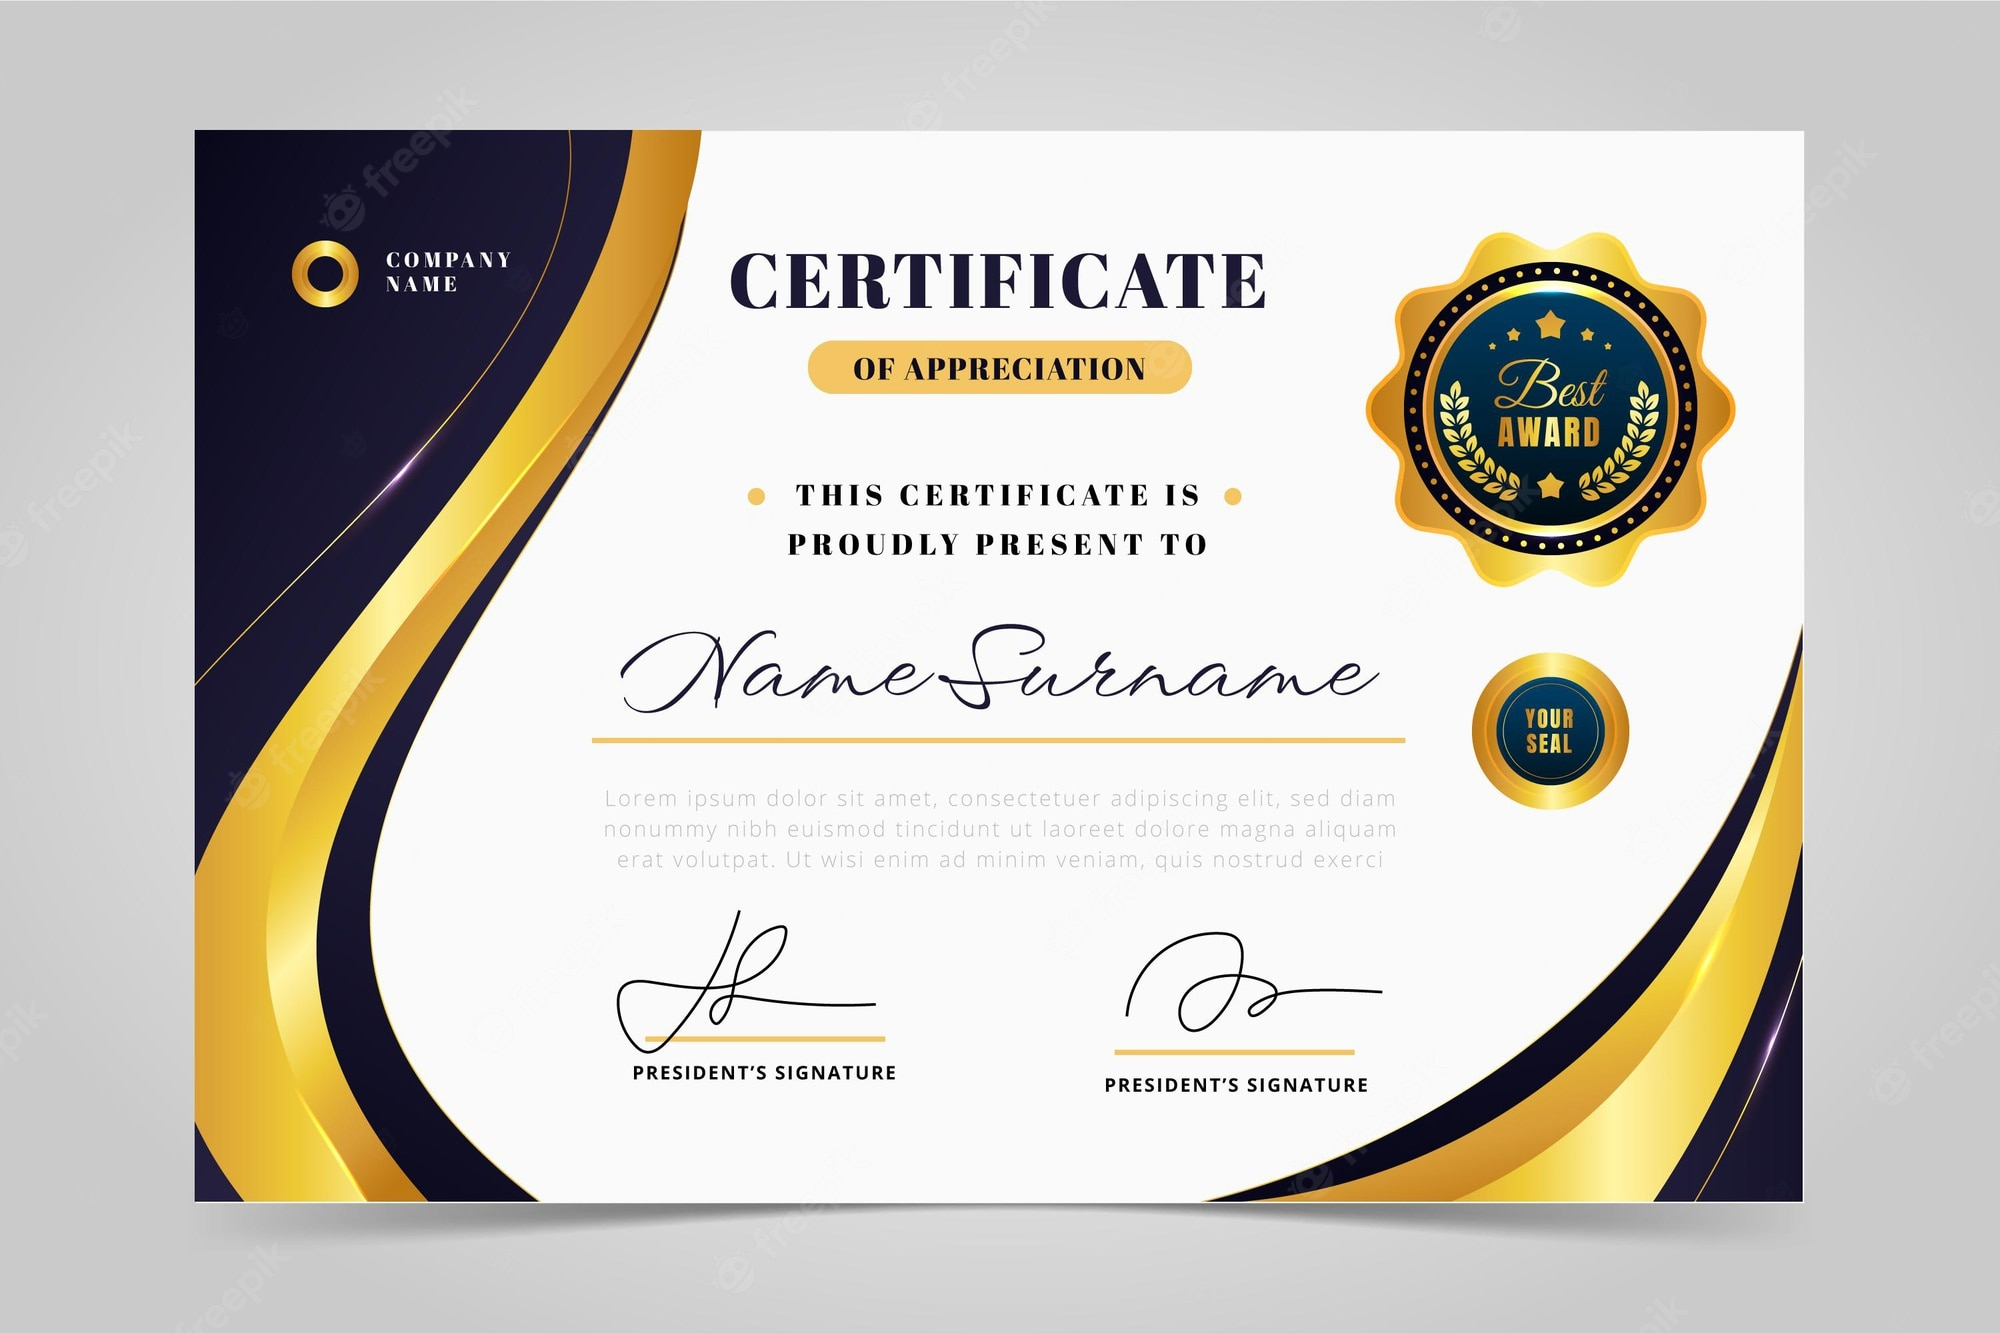 Employee certificate Images  Free Vectors, Stock Photos & PSD Pertaining To Employee Recognition Certificates Templates Free